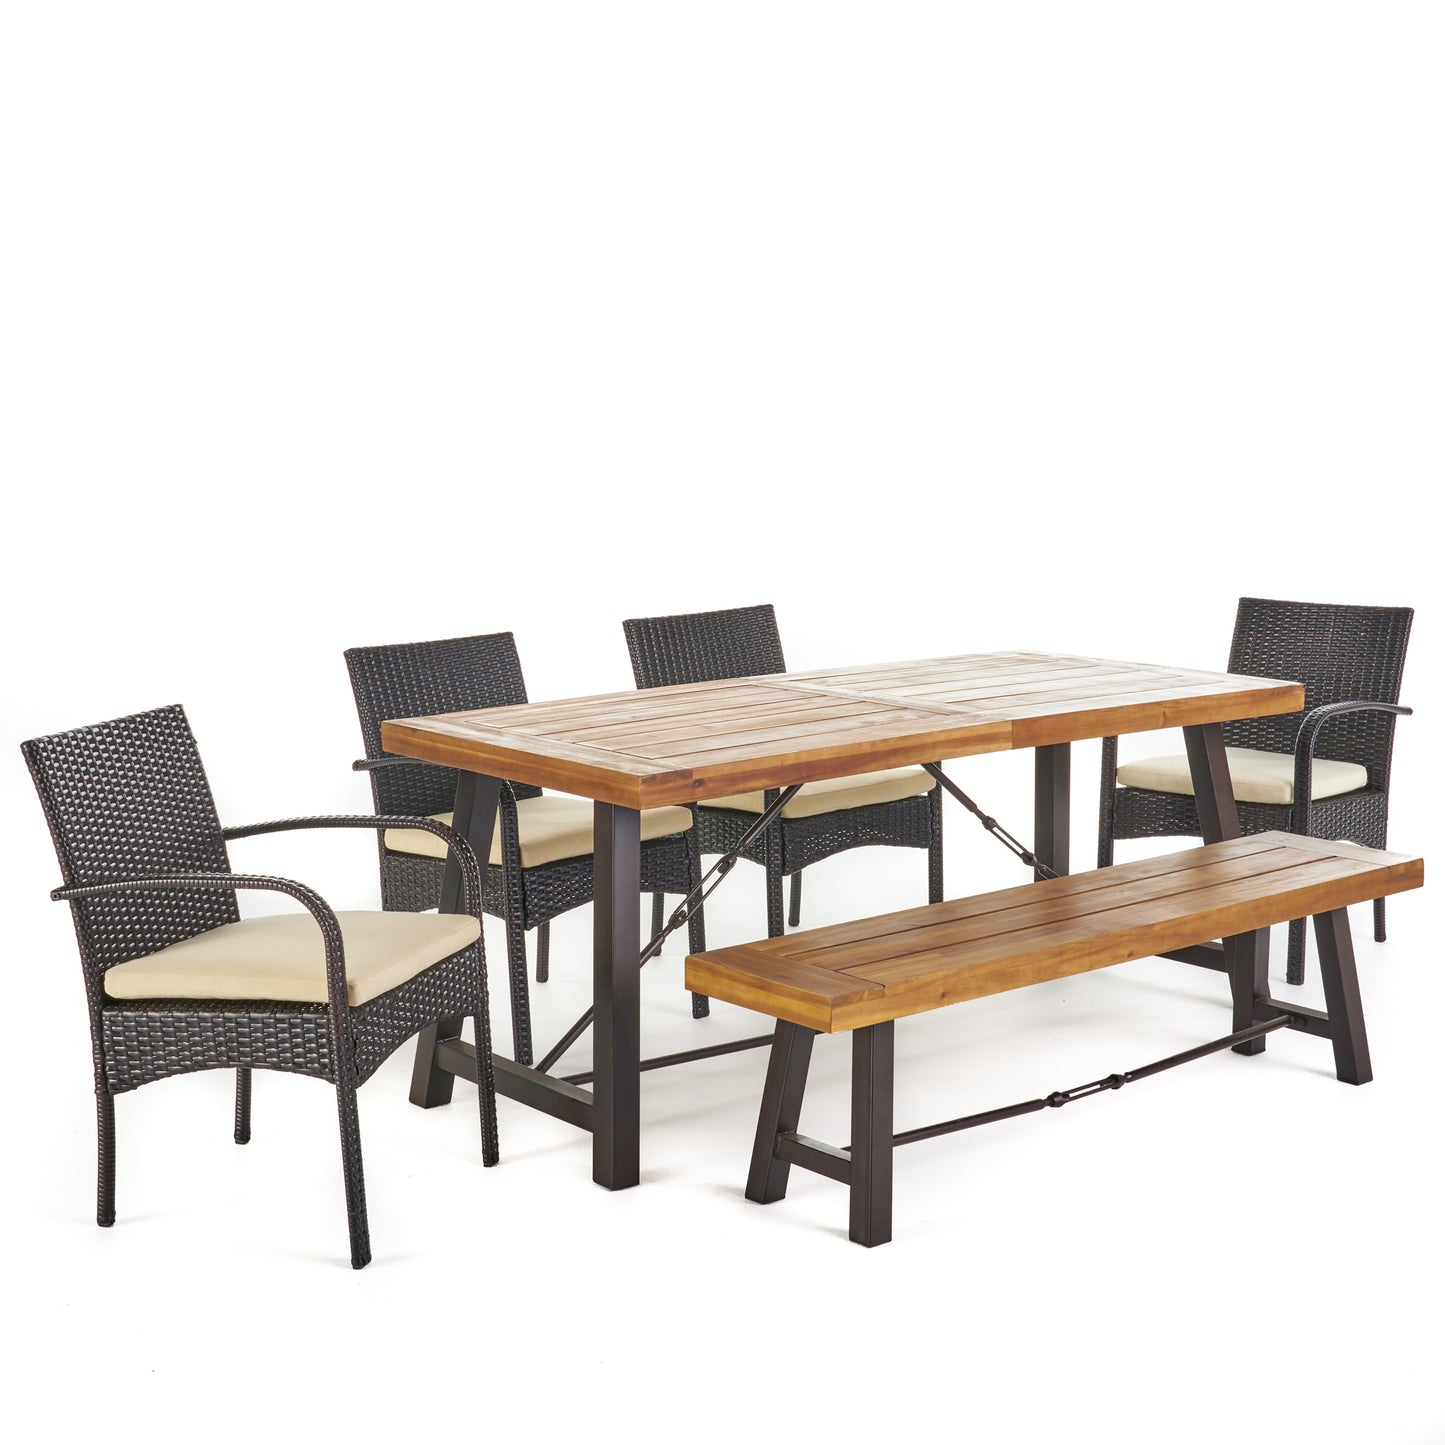 Belen Outdoor 6 Piece Teak Finished Acacia Wood Dining Set with Dining Chairs